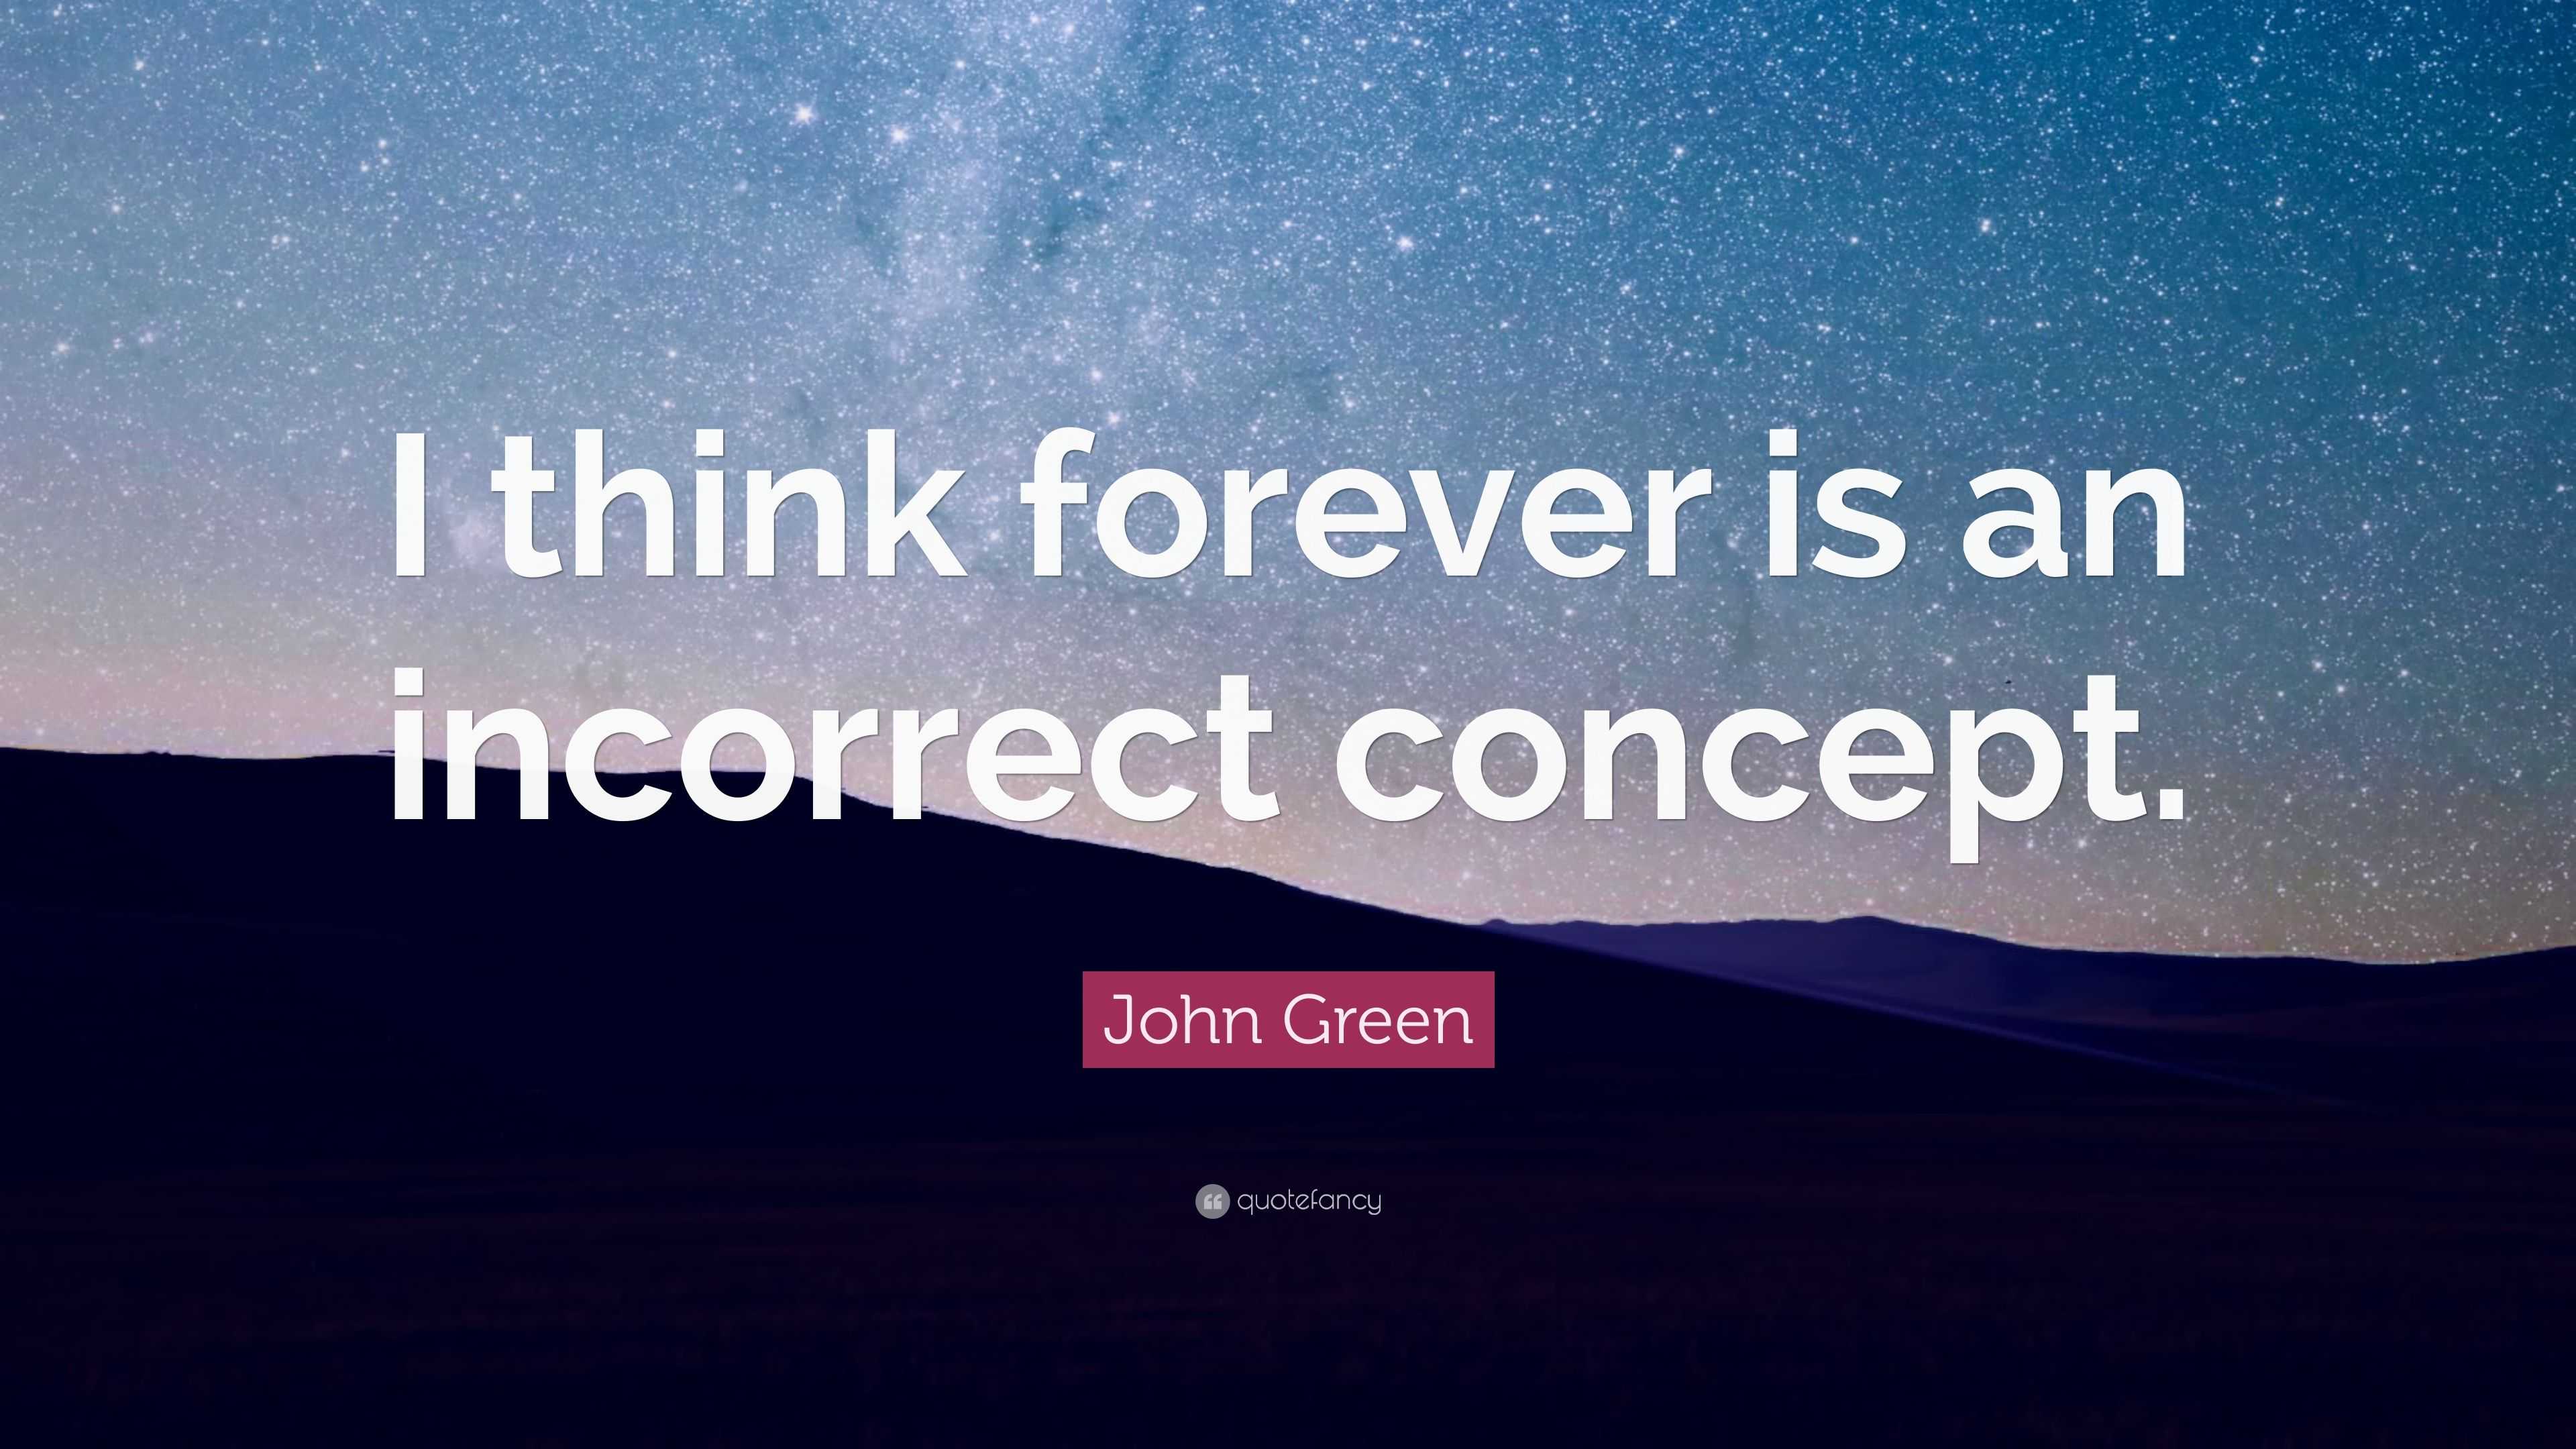 John Green Quote: “I think forever is an incorrect concept.”